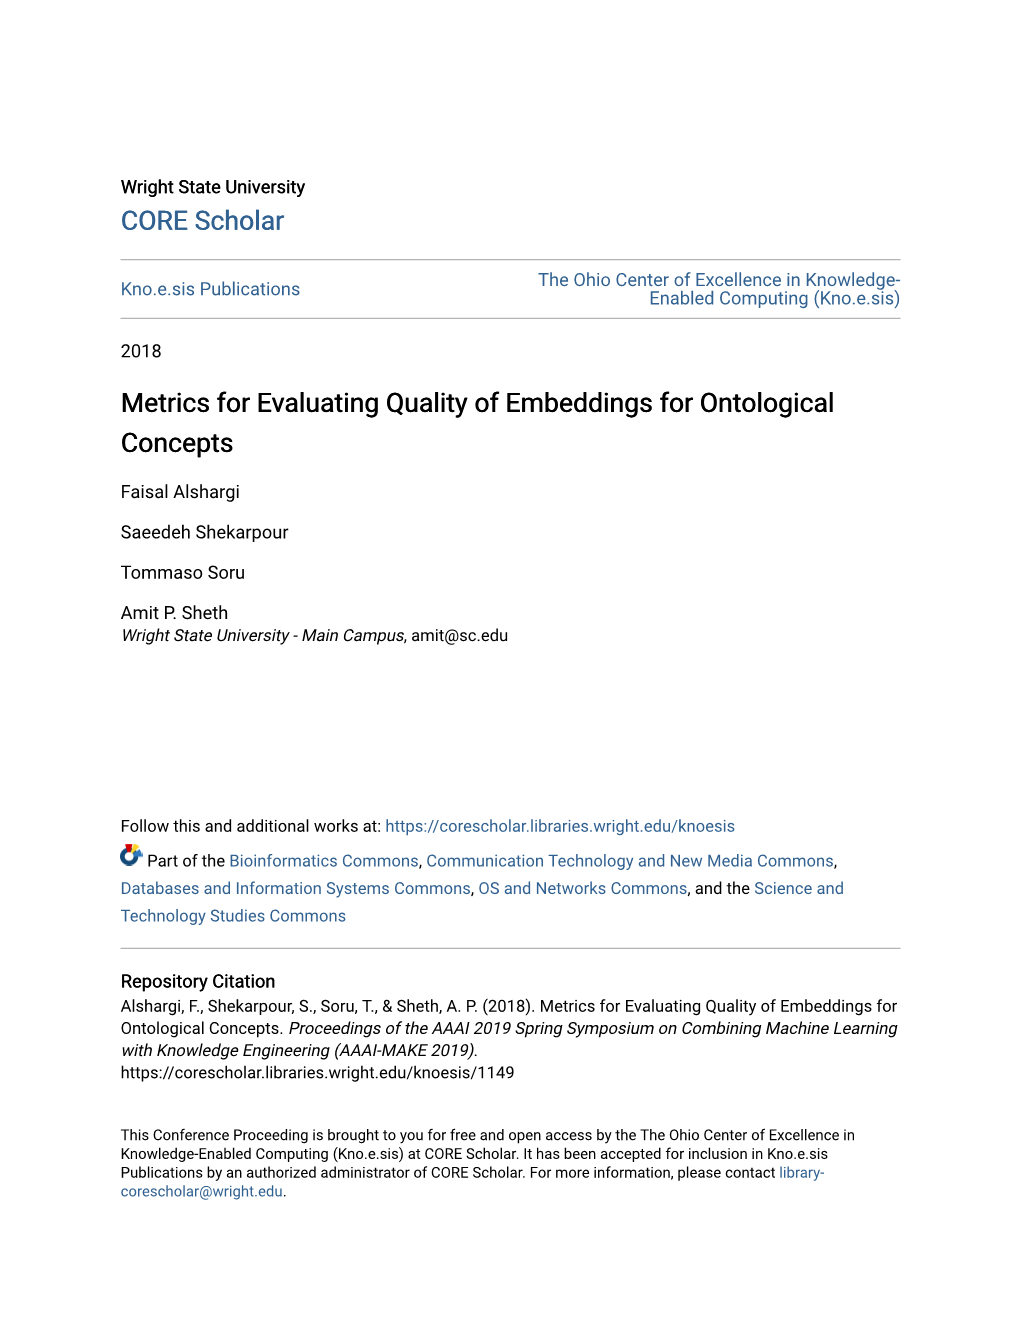 Metrics for Evaluating Quality of Embeddings for Ontological Concepts